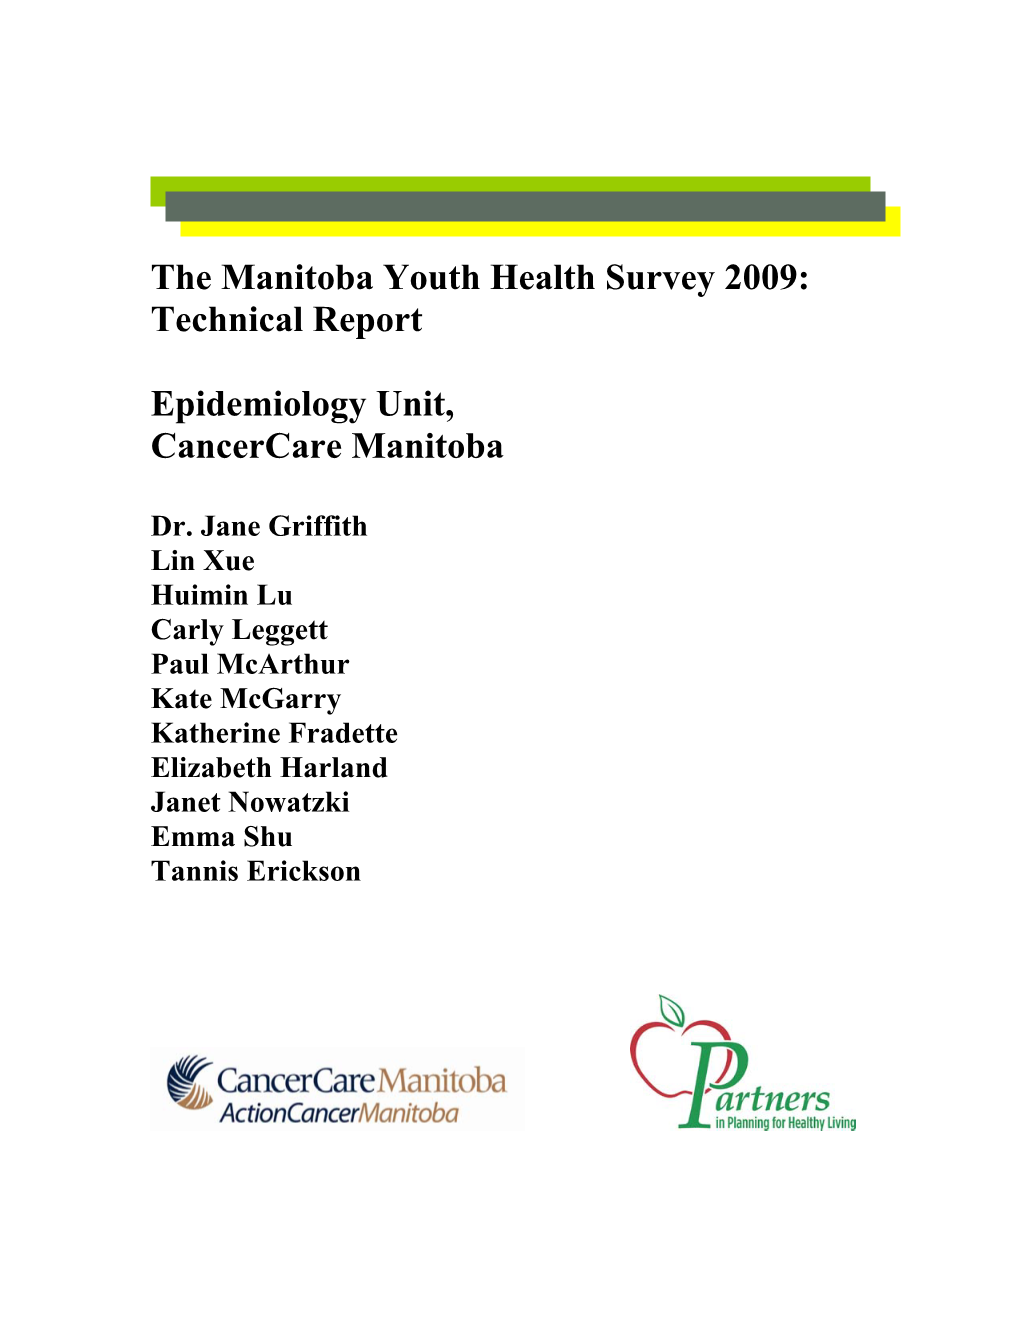 The Manitoba Youth Health Survey 2009: Technical Report